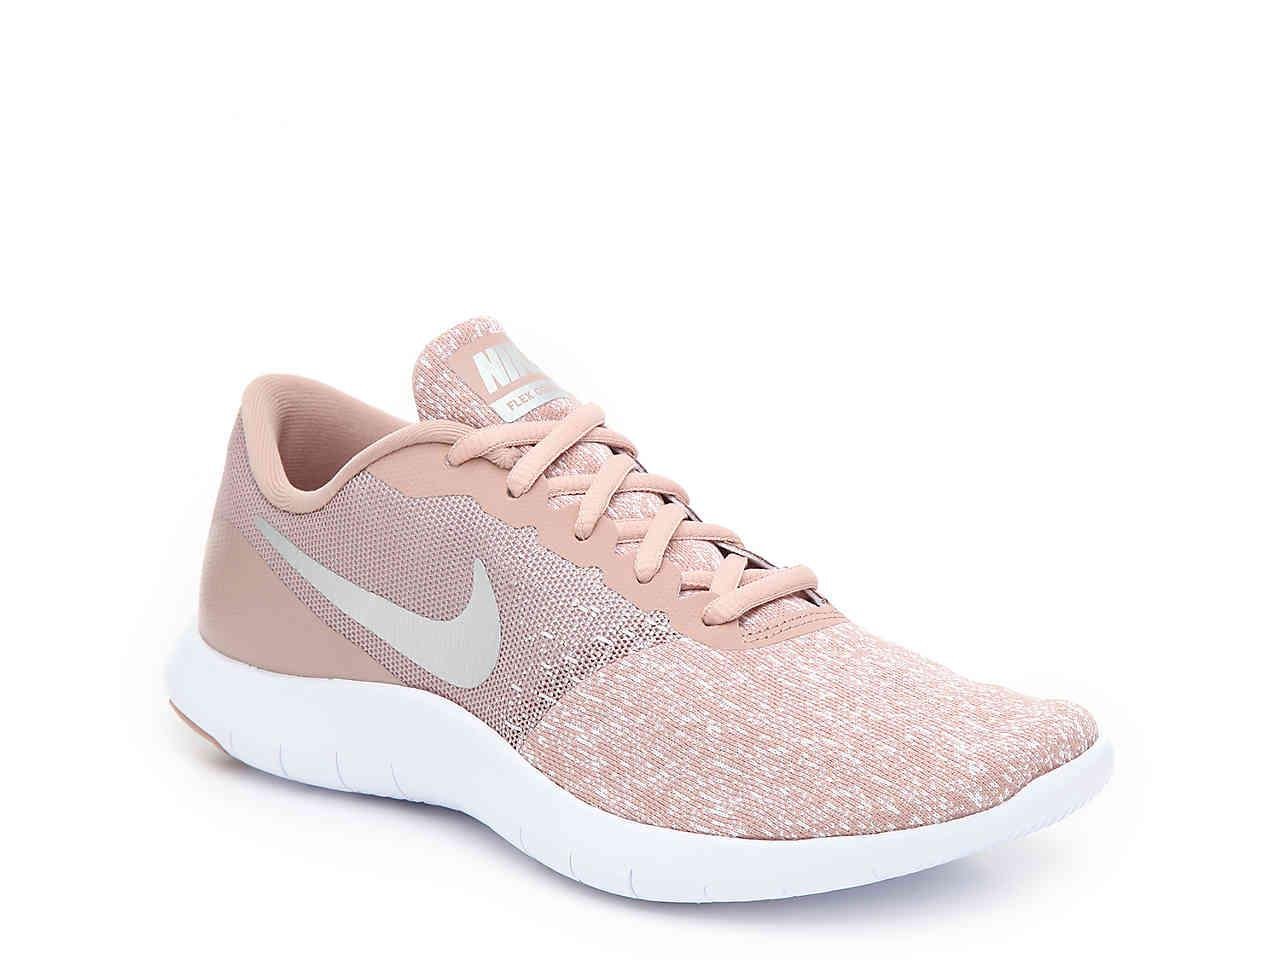 Nike Synthetic Flex Contact Lightweight Running Shoe in Dusty Pink (Pink) |  Lyst